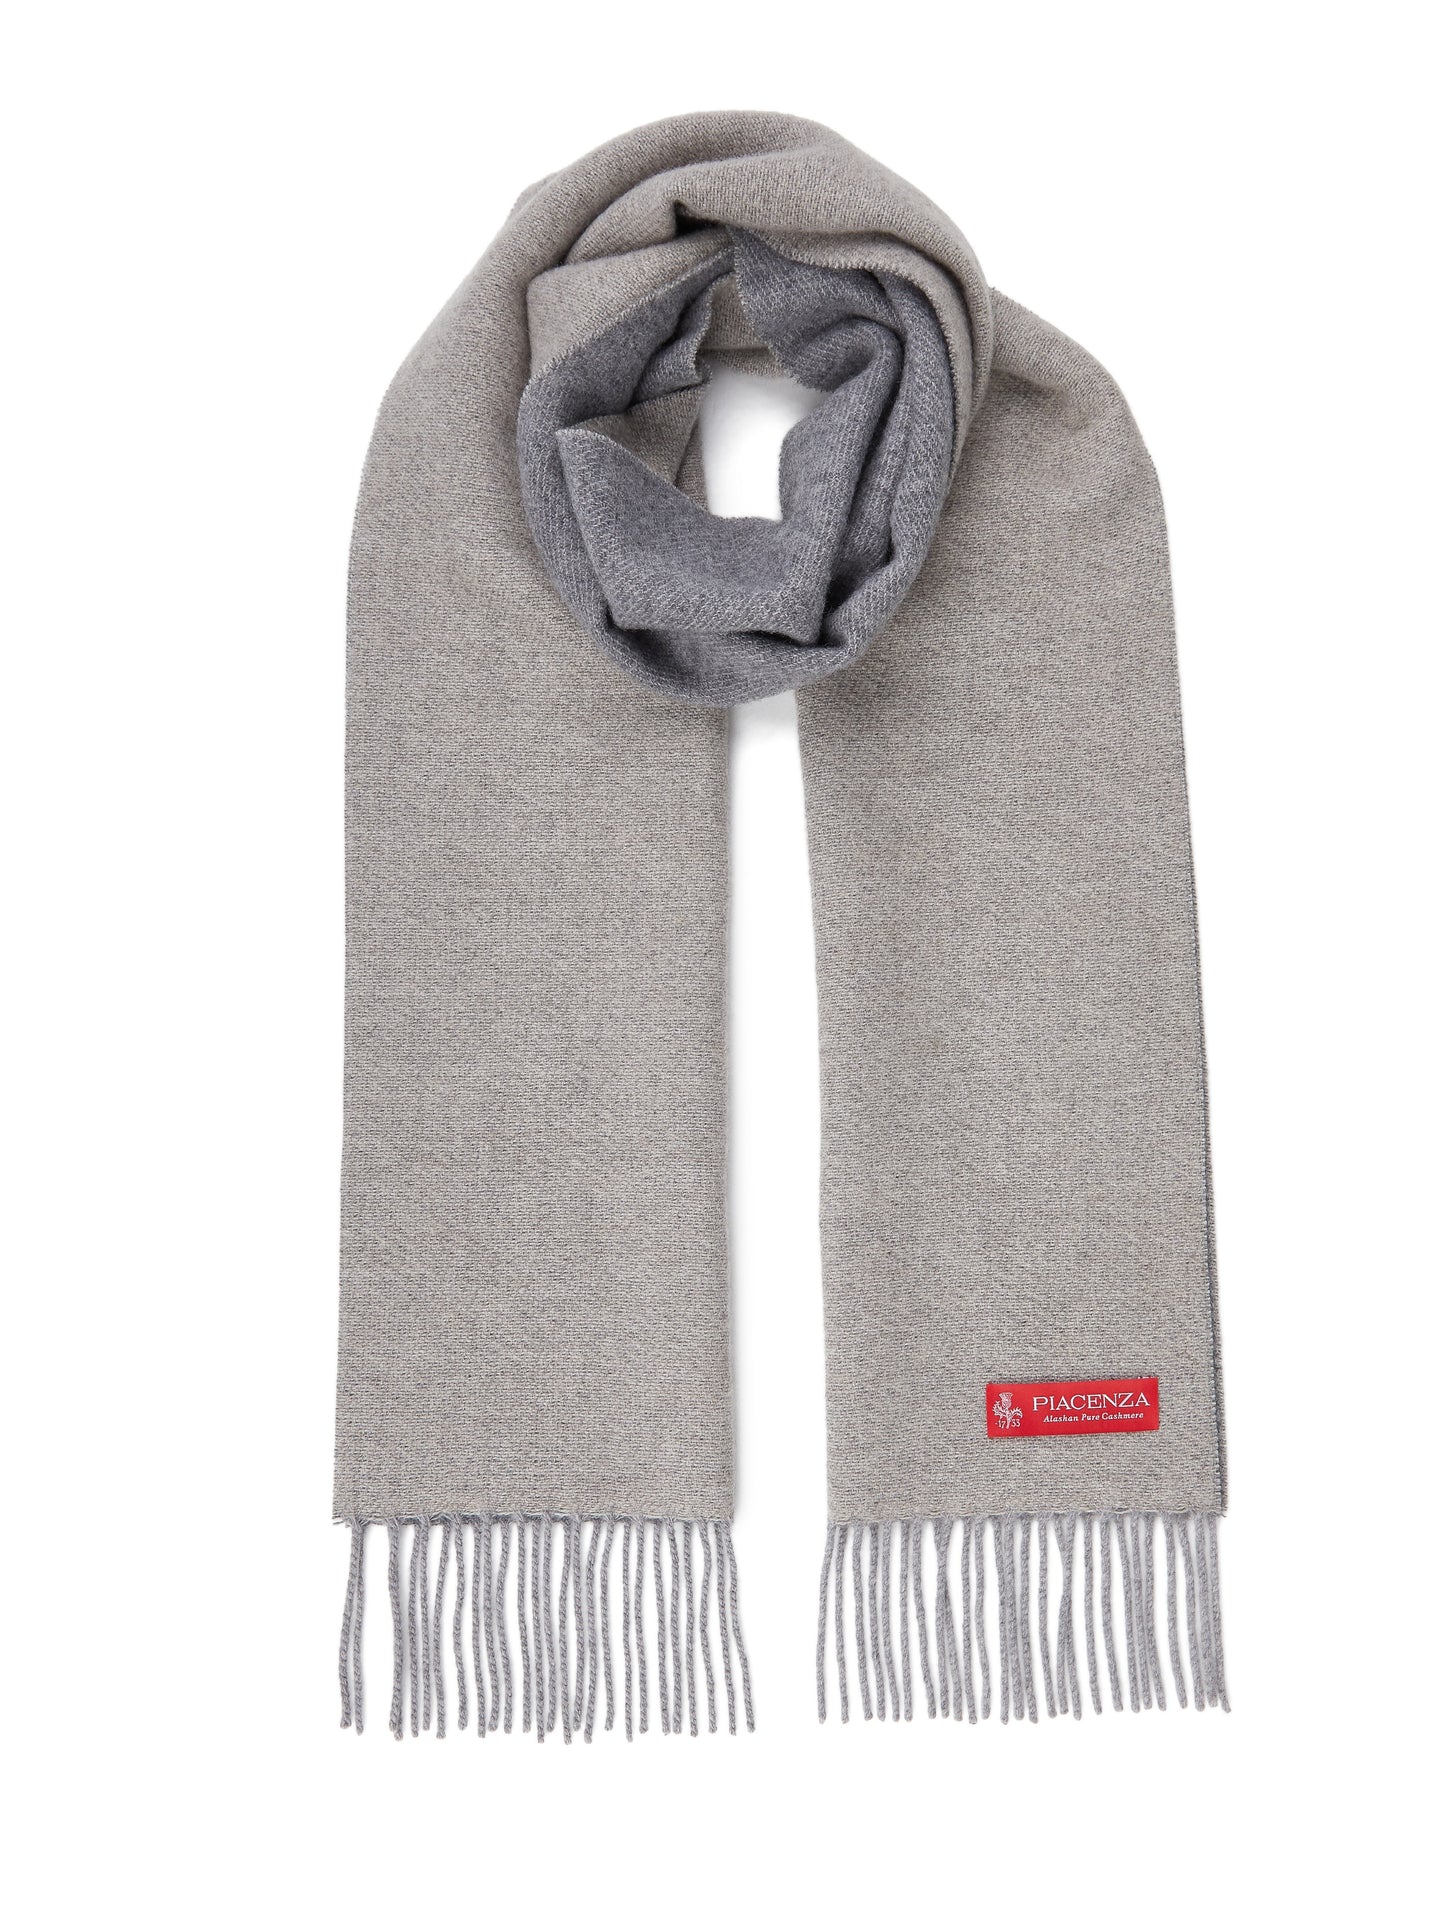 Supreme two-tone gray fringed scarf